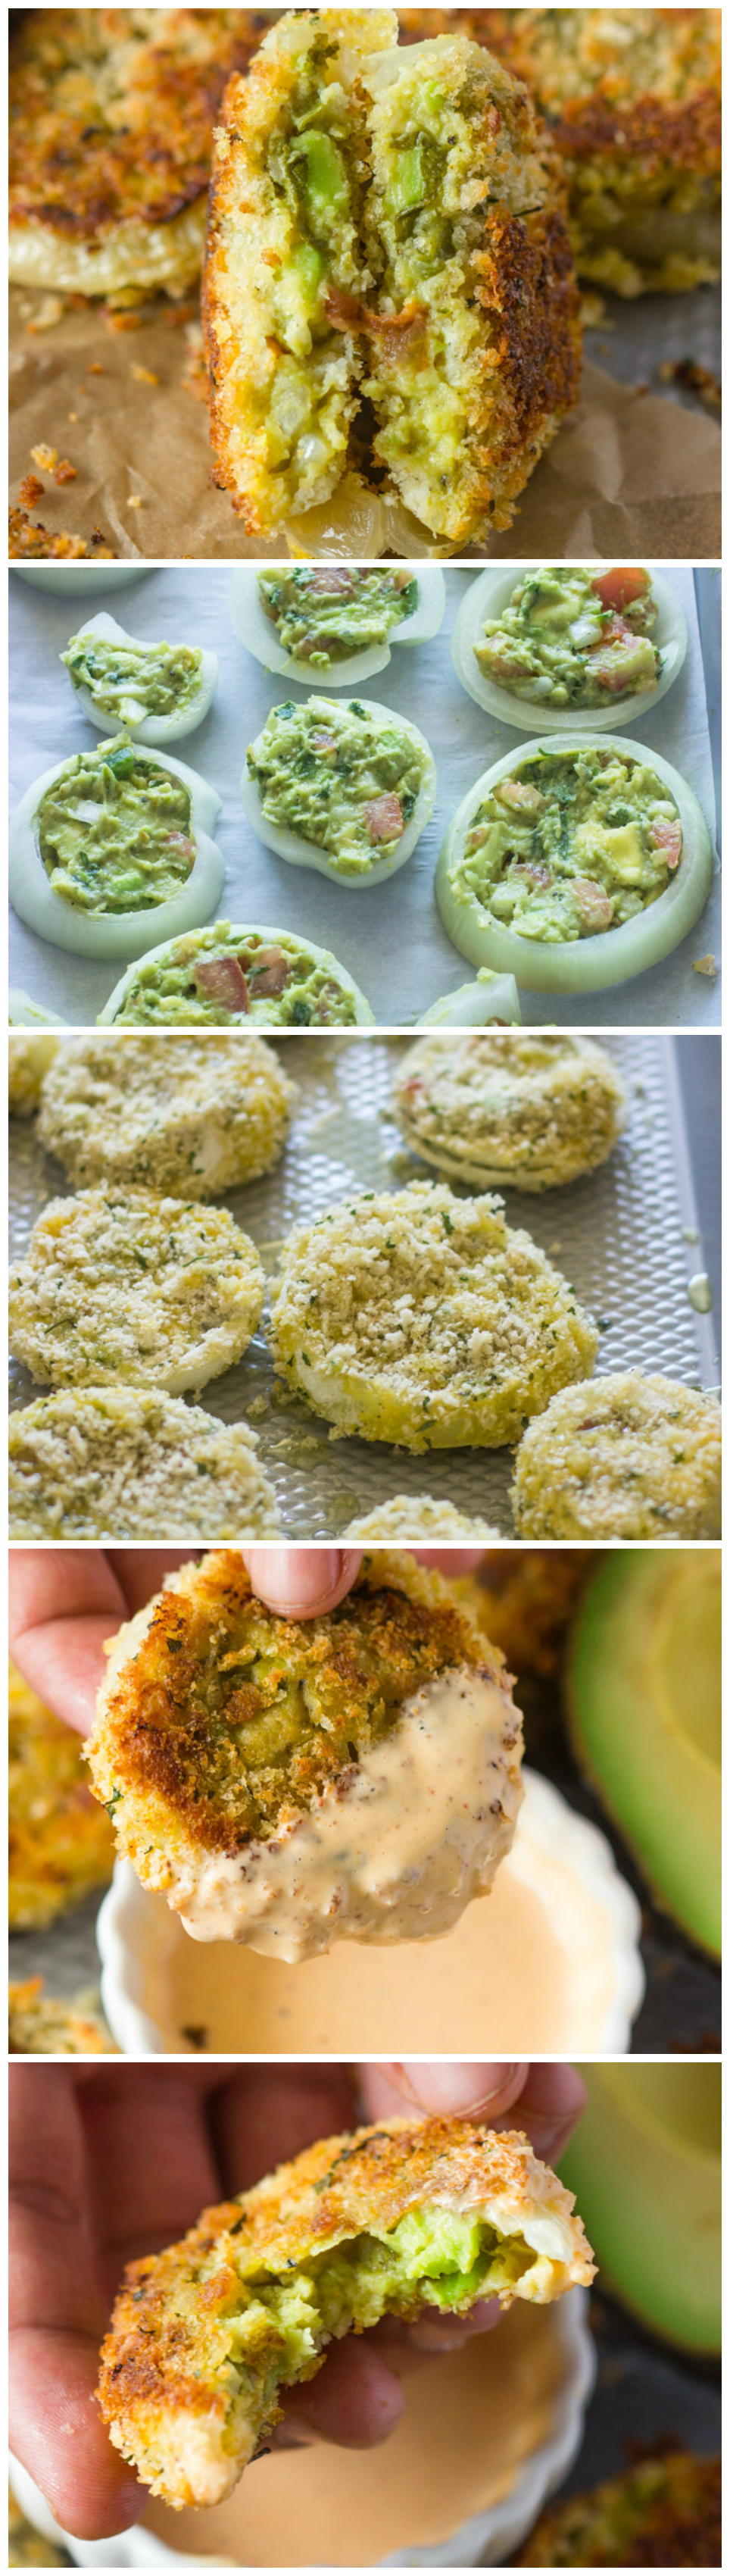 Baked Guacamole Stuffed Onion Rings with Chipotle Dipping Sauce (Video)